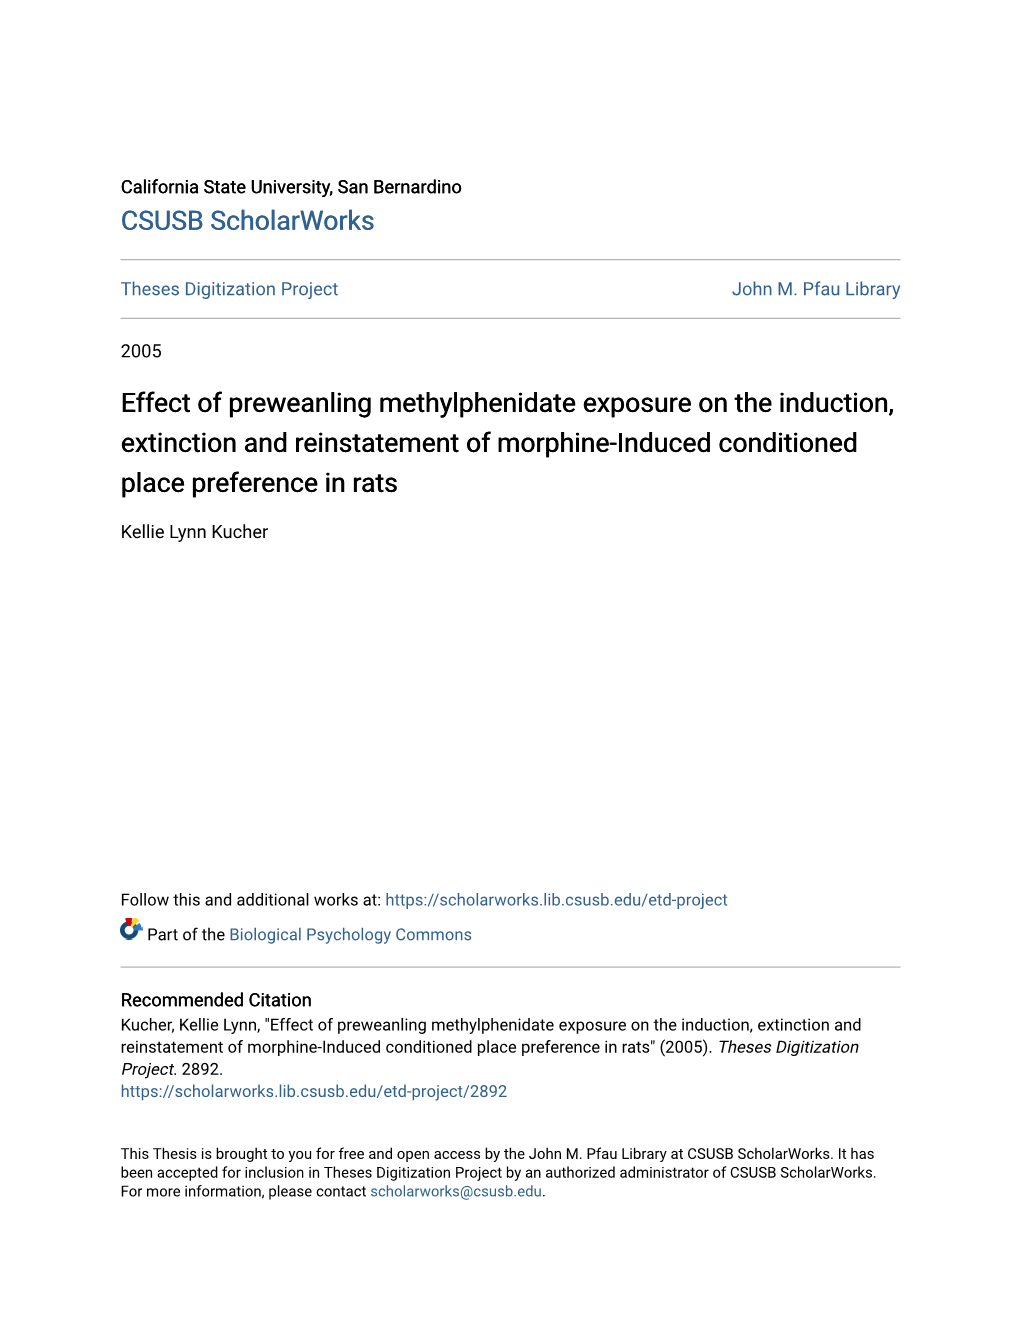 Effect of Preweanling Methylphenidate Exposure on the Induction, Extinction and Reinstatement of Morphine-Induced Conditioned Place Preference in Rats